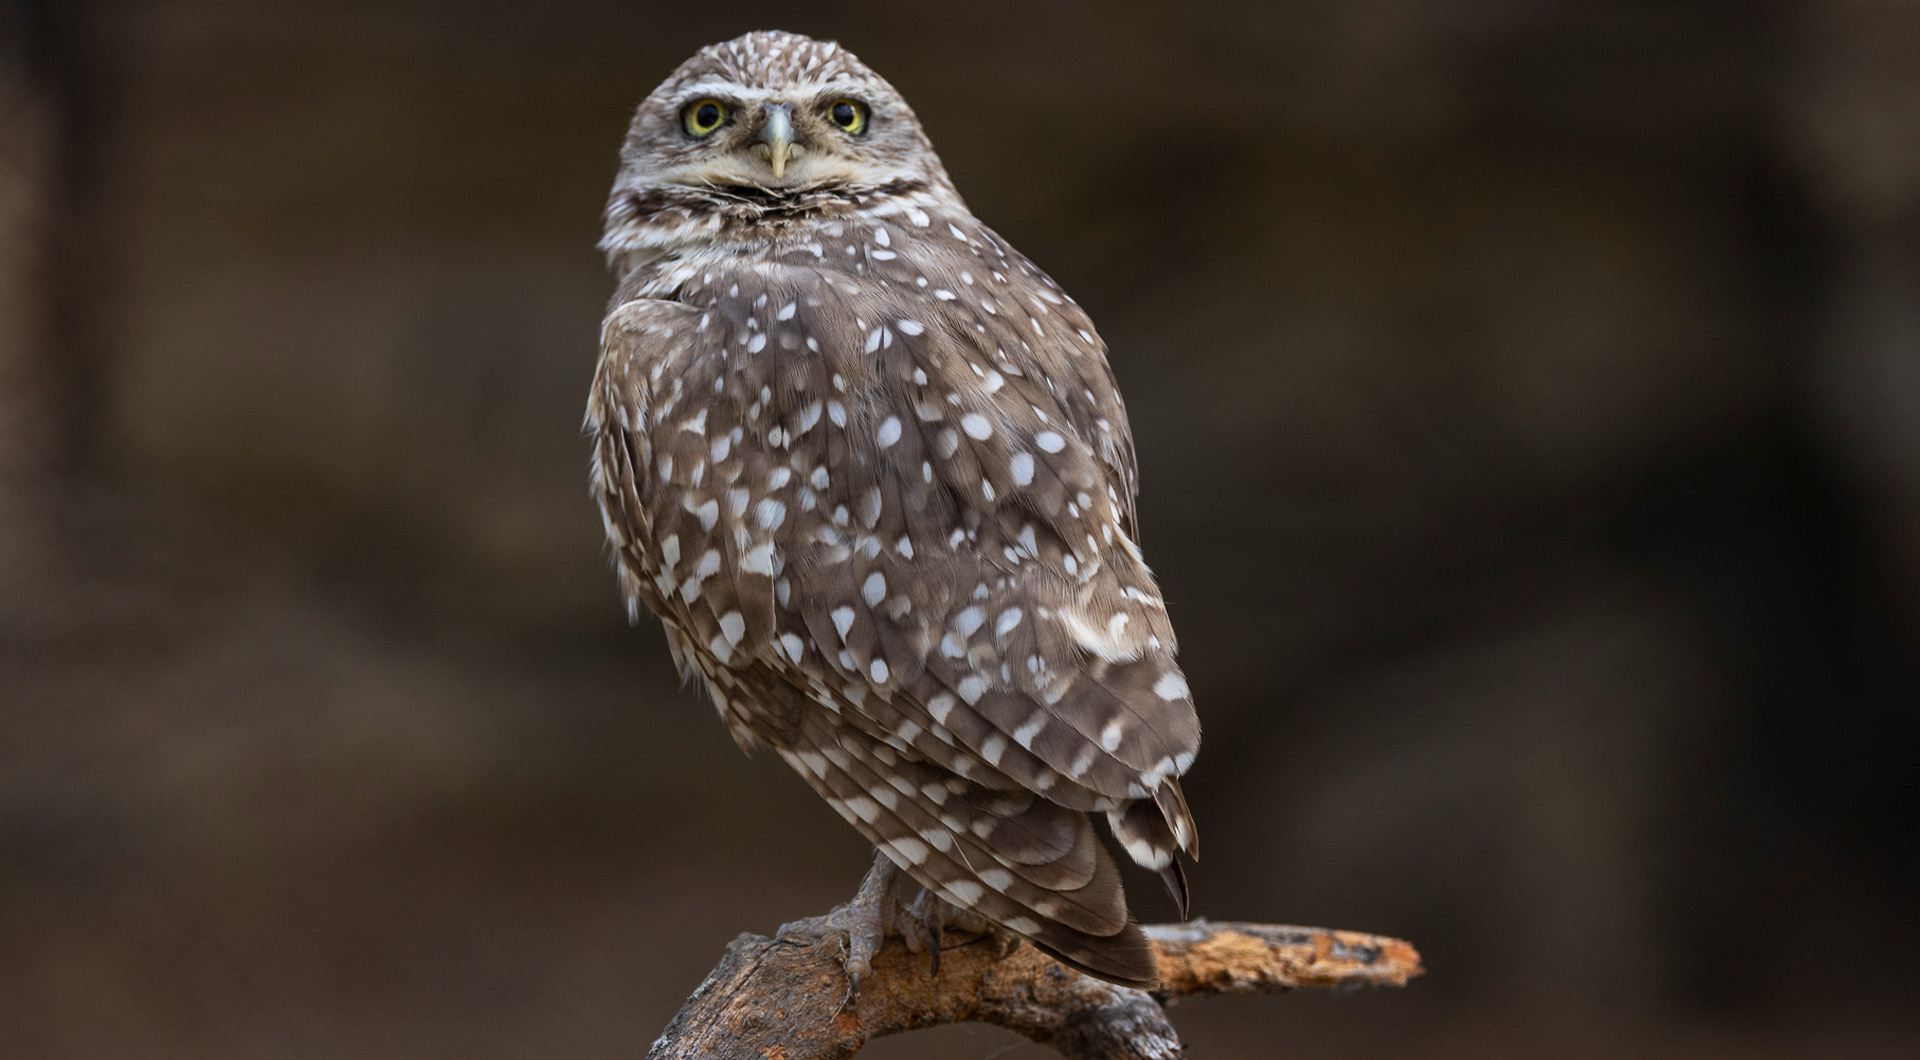 Southwestern Burrowing Owl Perched on a Branch Looking at Viewer